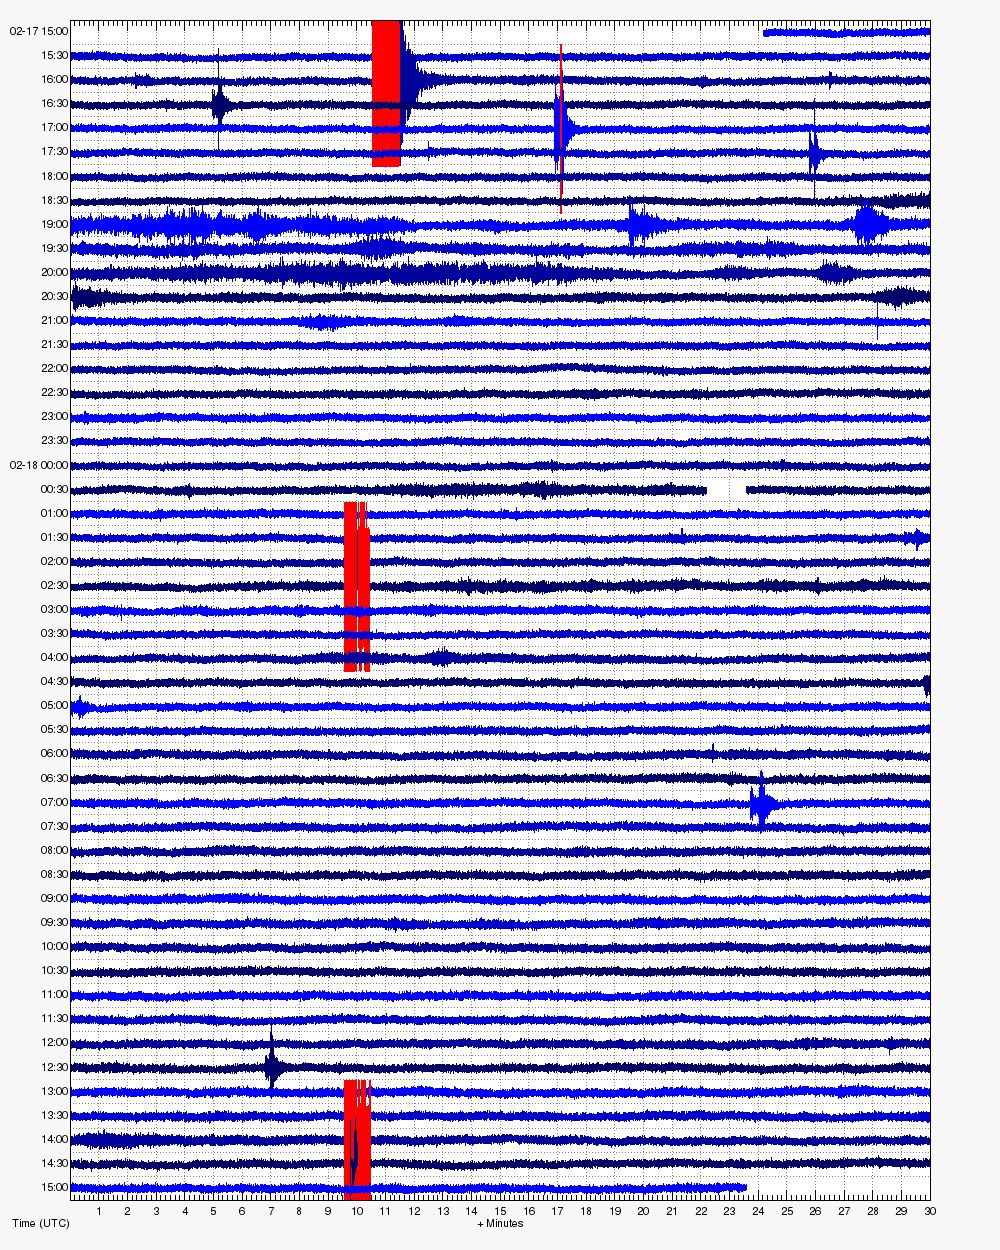 Seismic signal from Bogoslof volcano, MSW station (on Makushin 60 km to the east from Bogoslof)